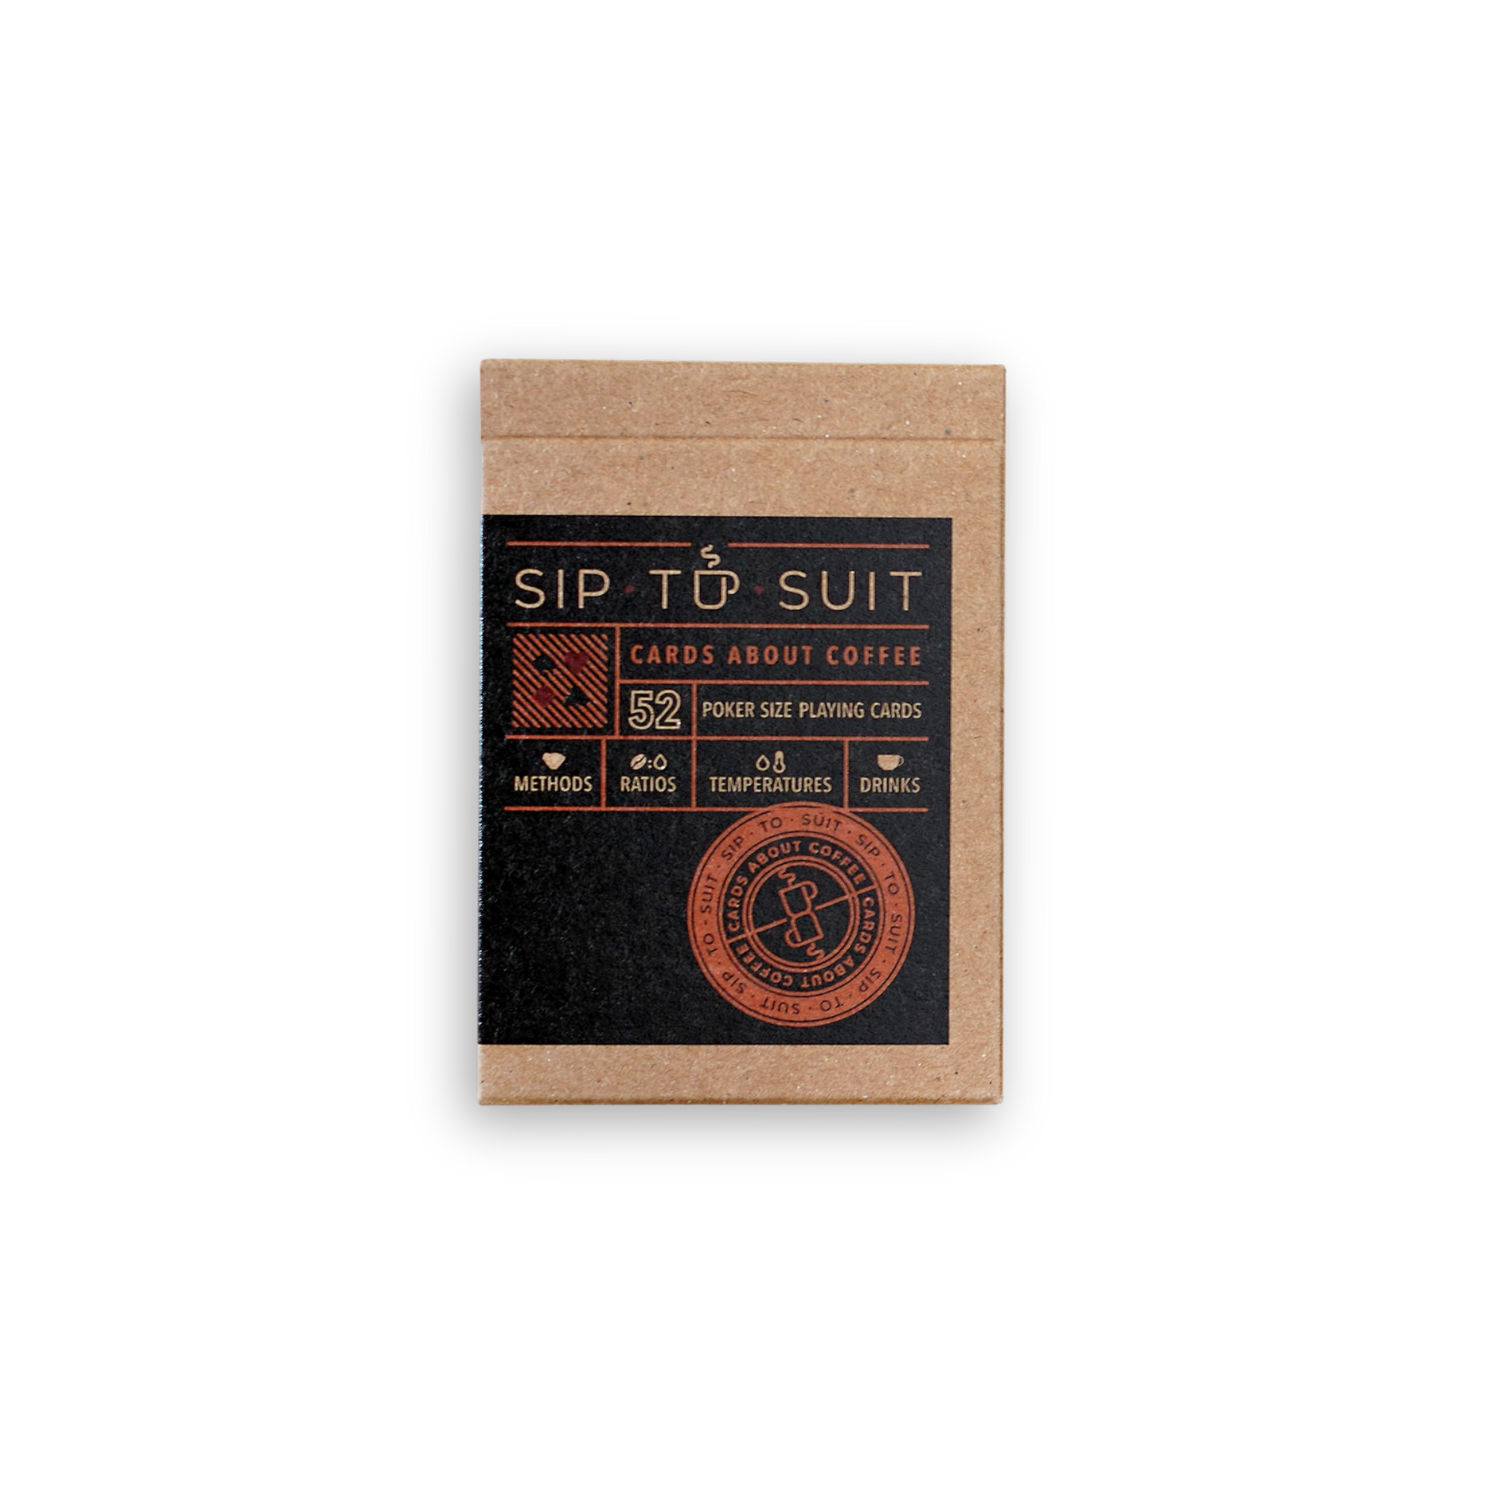 Sip to Suit card set, which includes cards about coffee